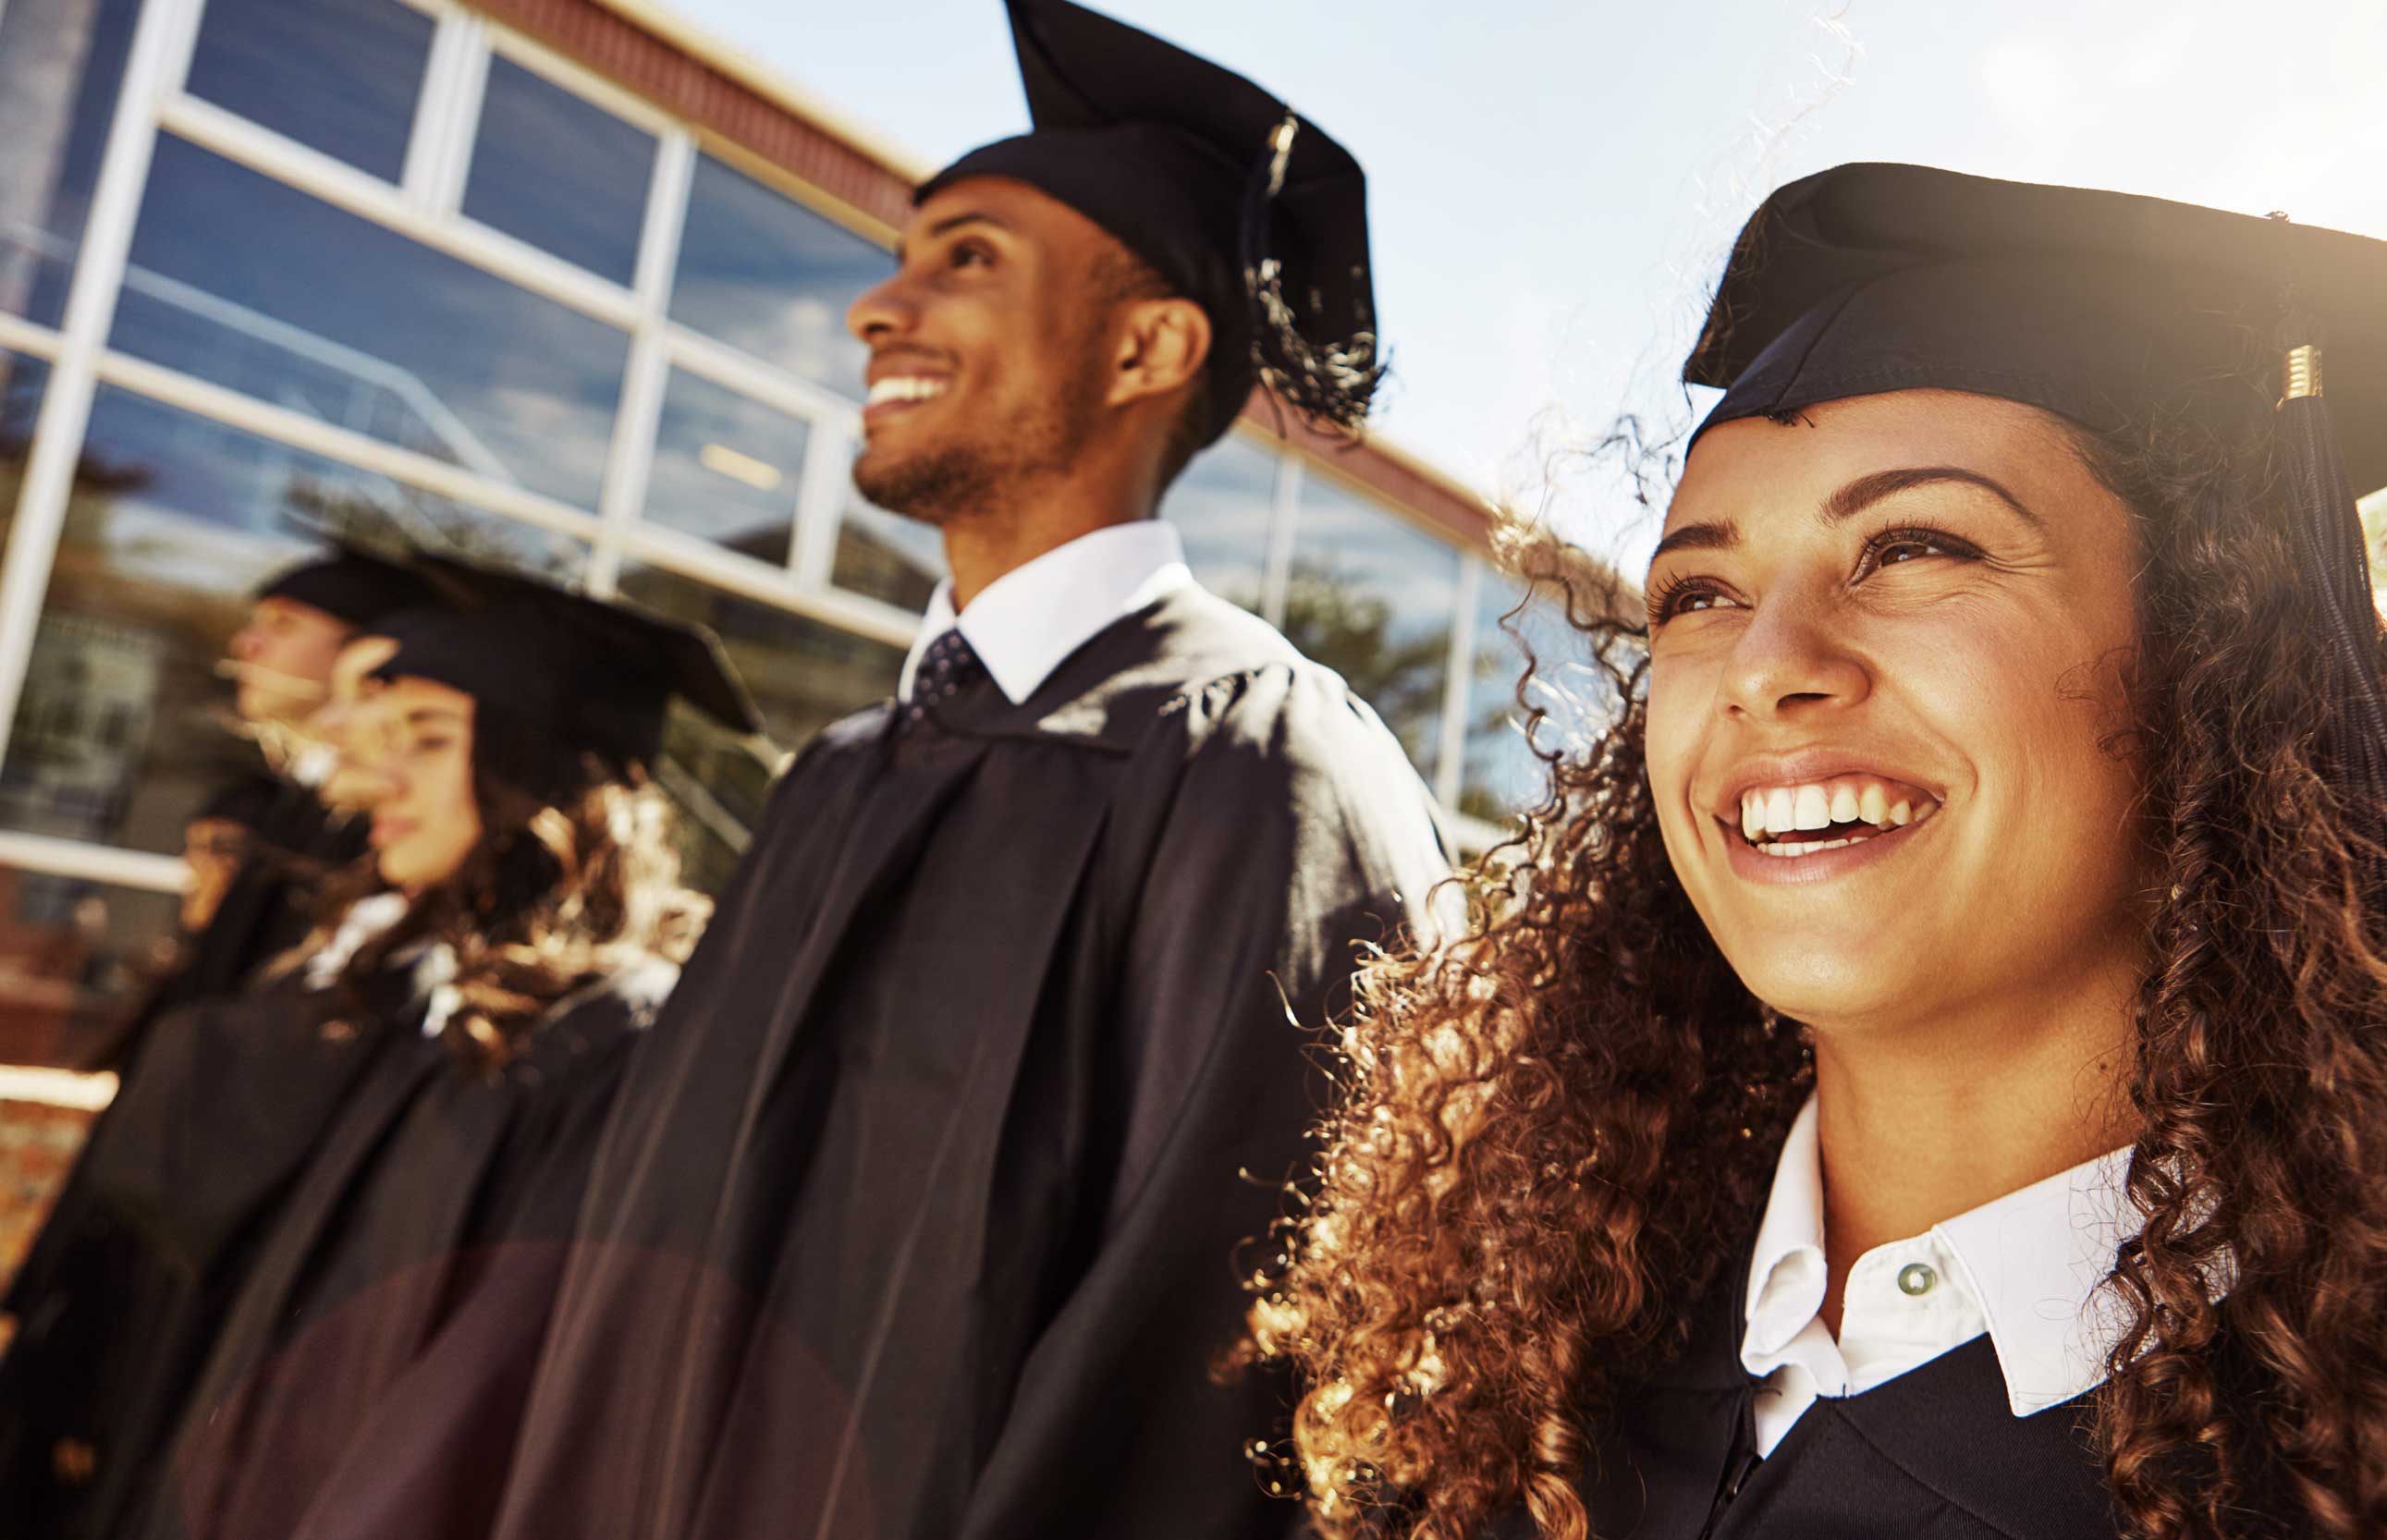 You've just graduated college and you'd like to be wealthy someday. Get started now.